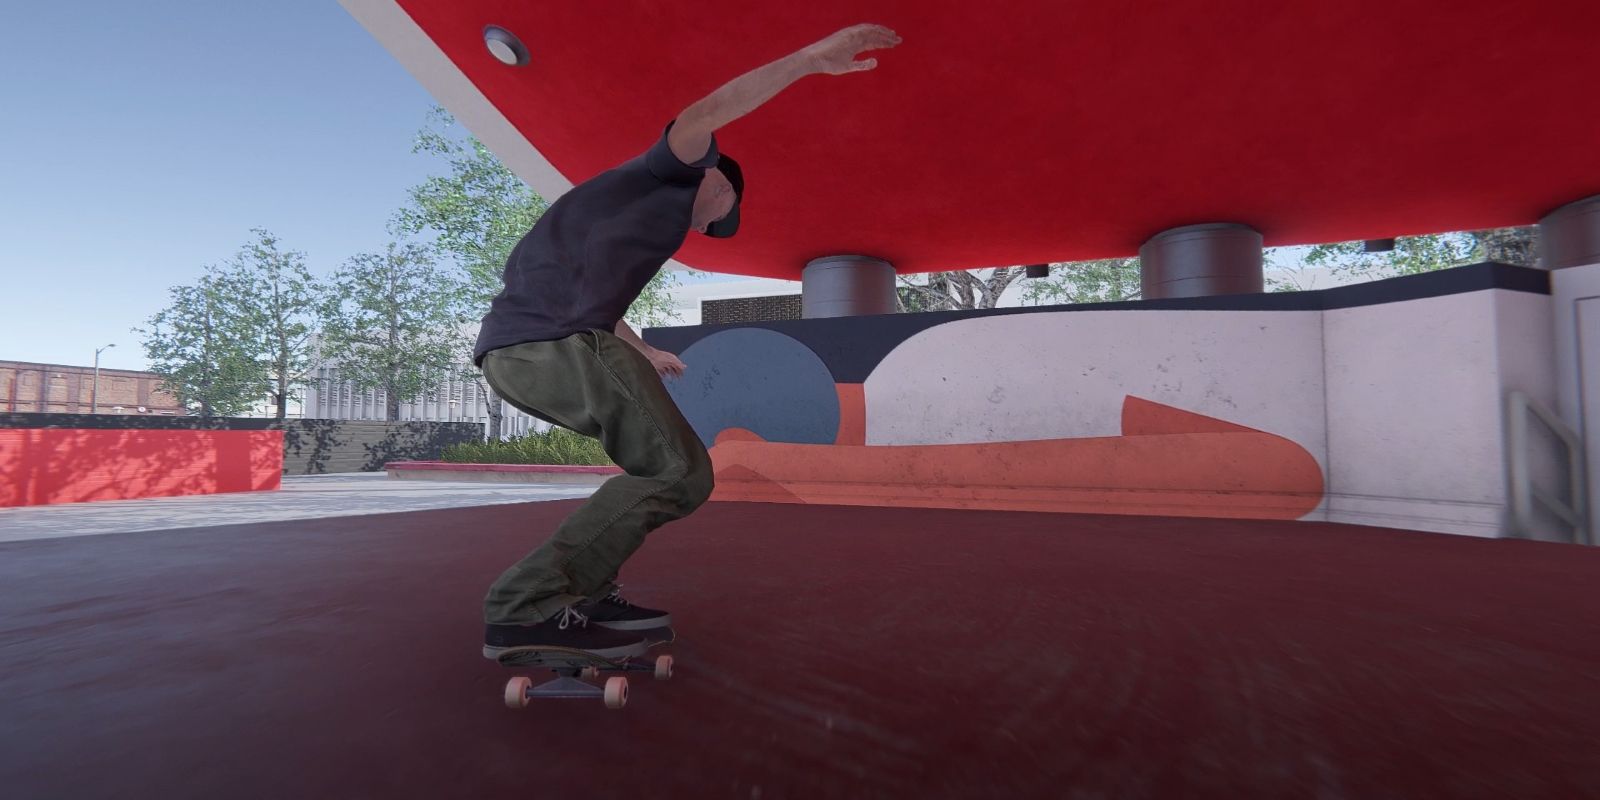 Skate: release date speculation, trailers, gameplay, and more